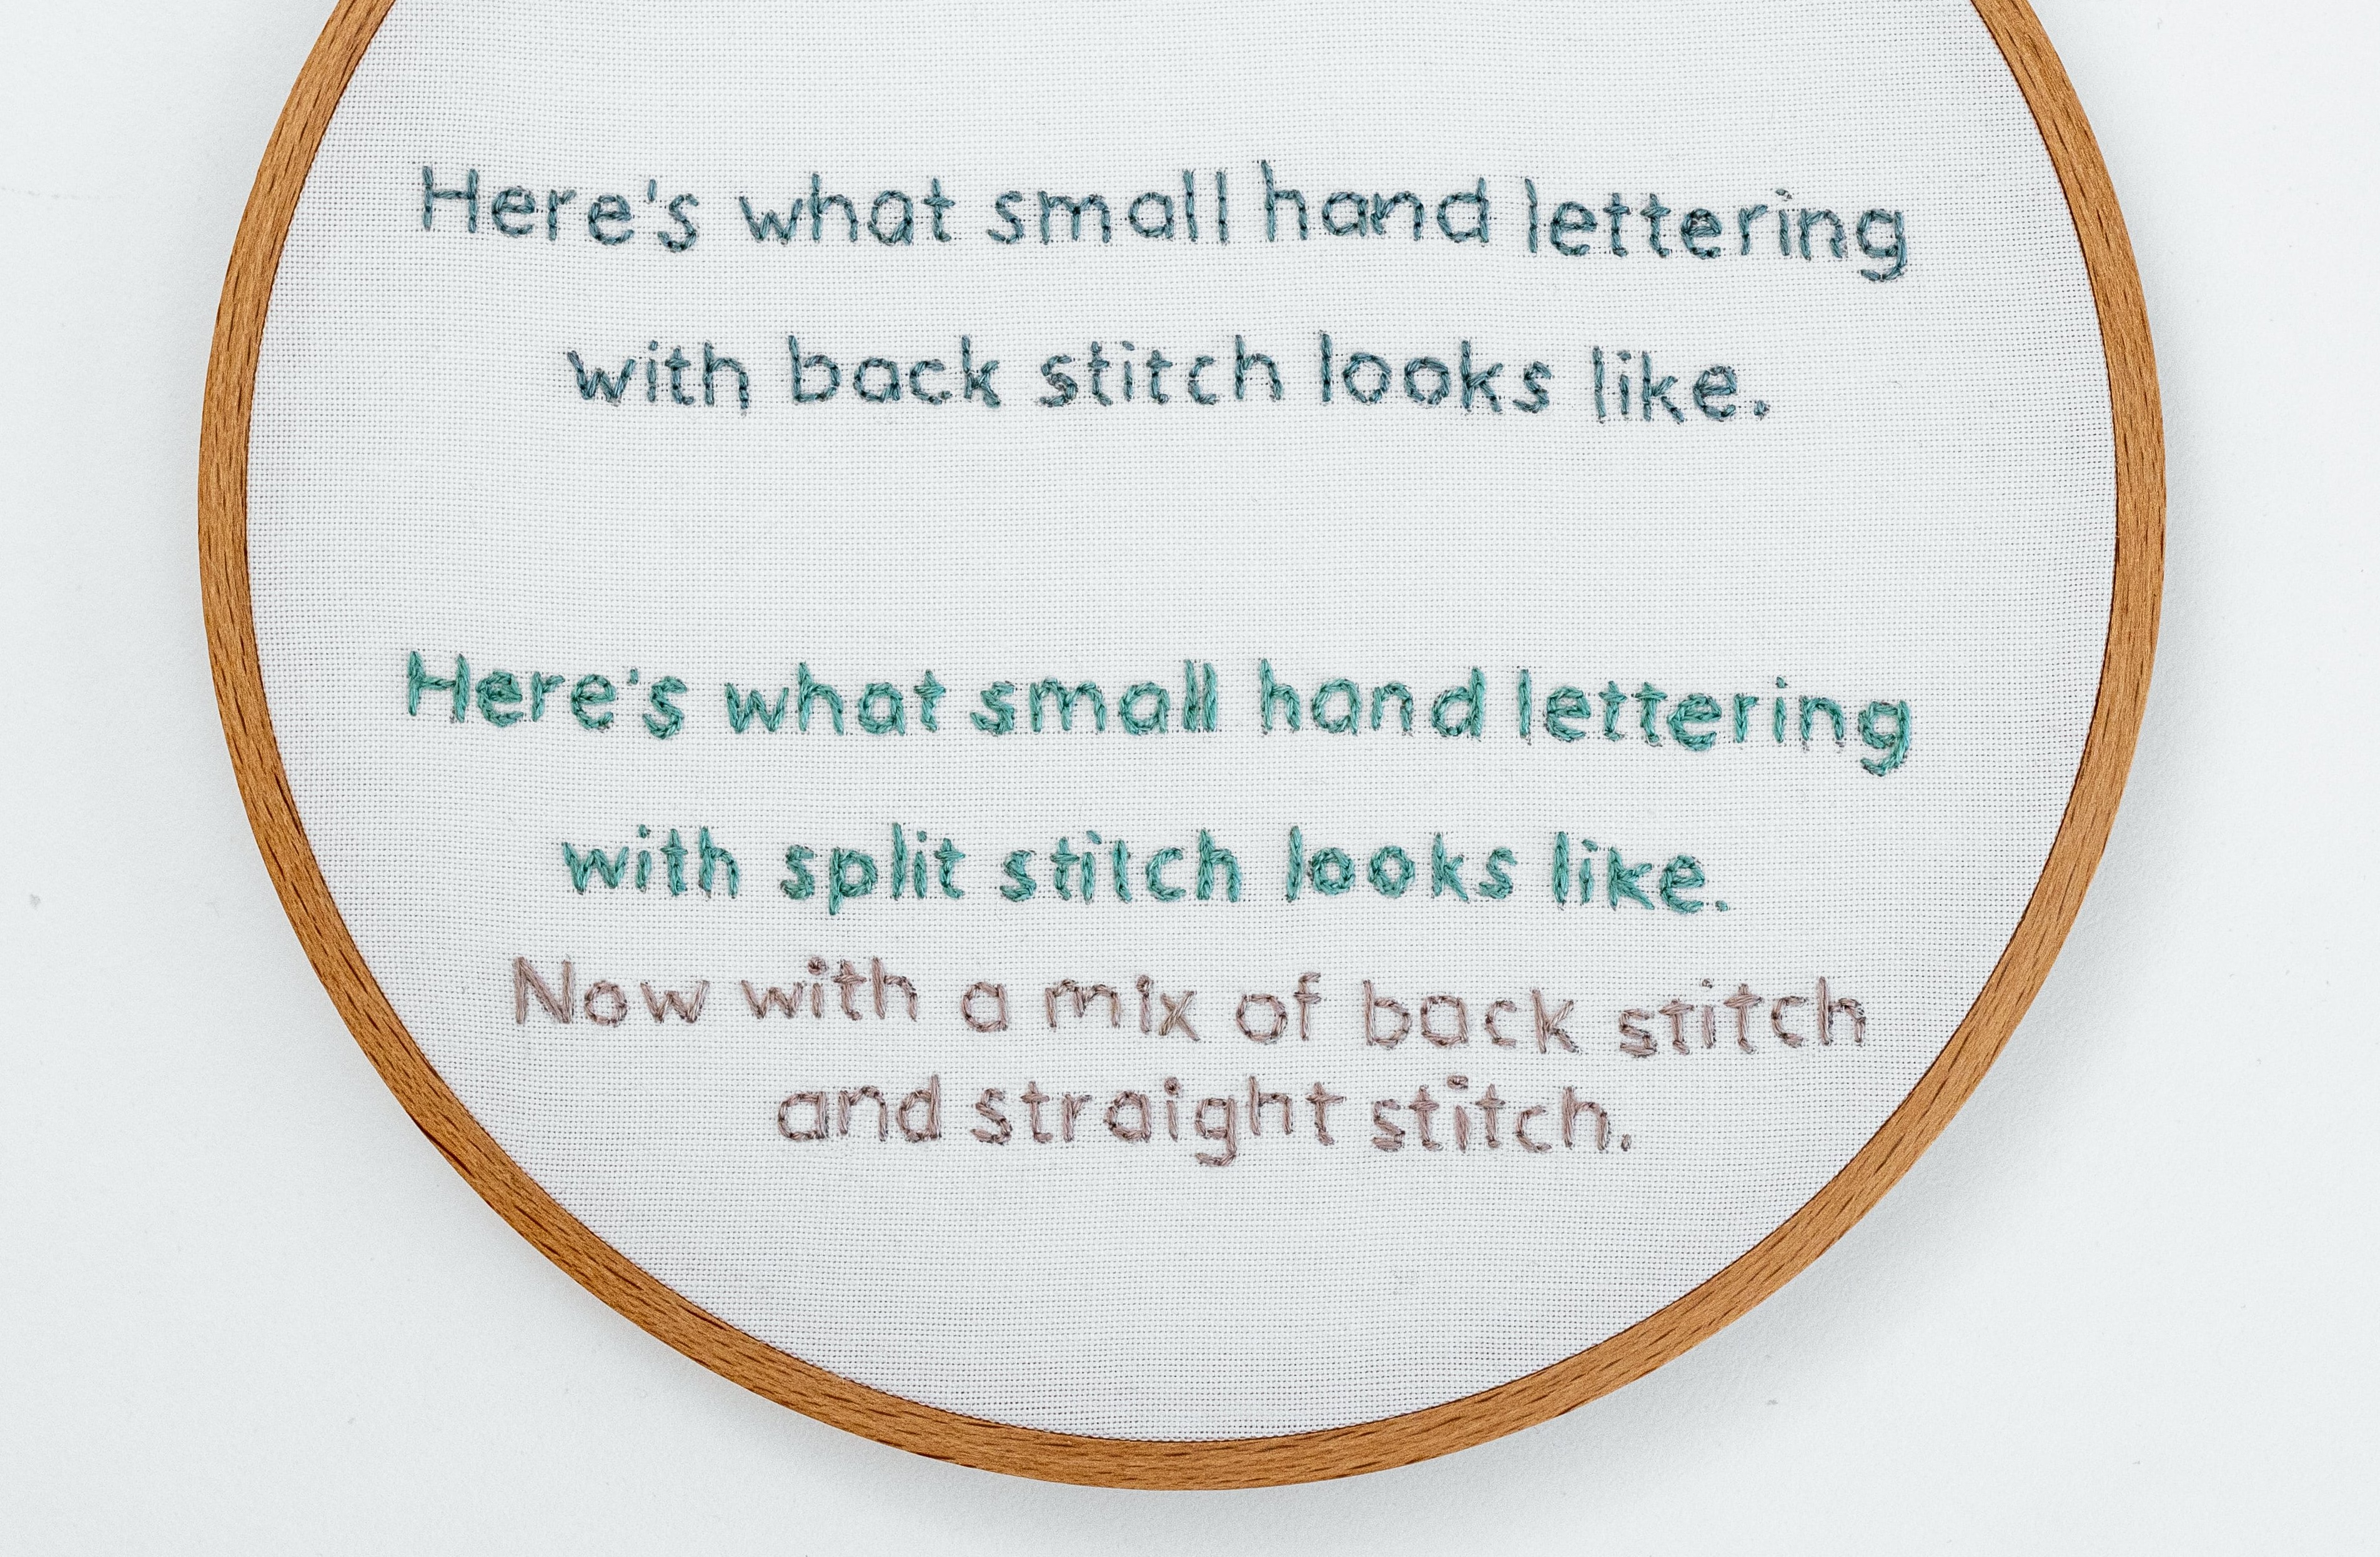 This is a image of a simple and readable stitched font.